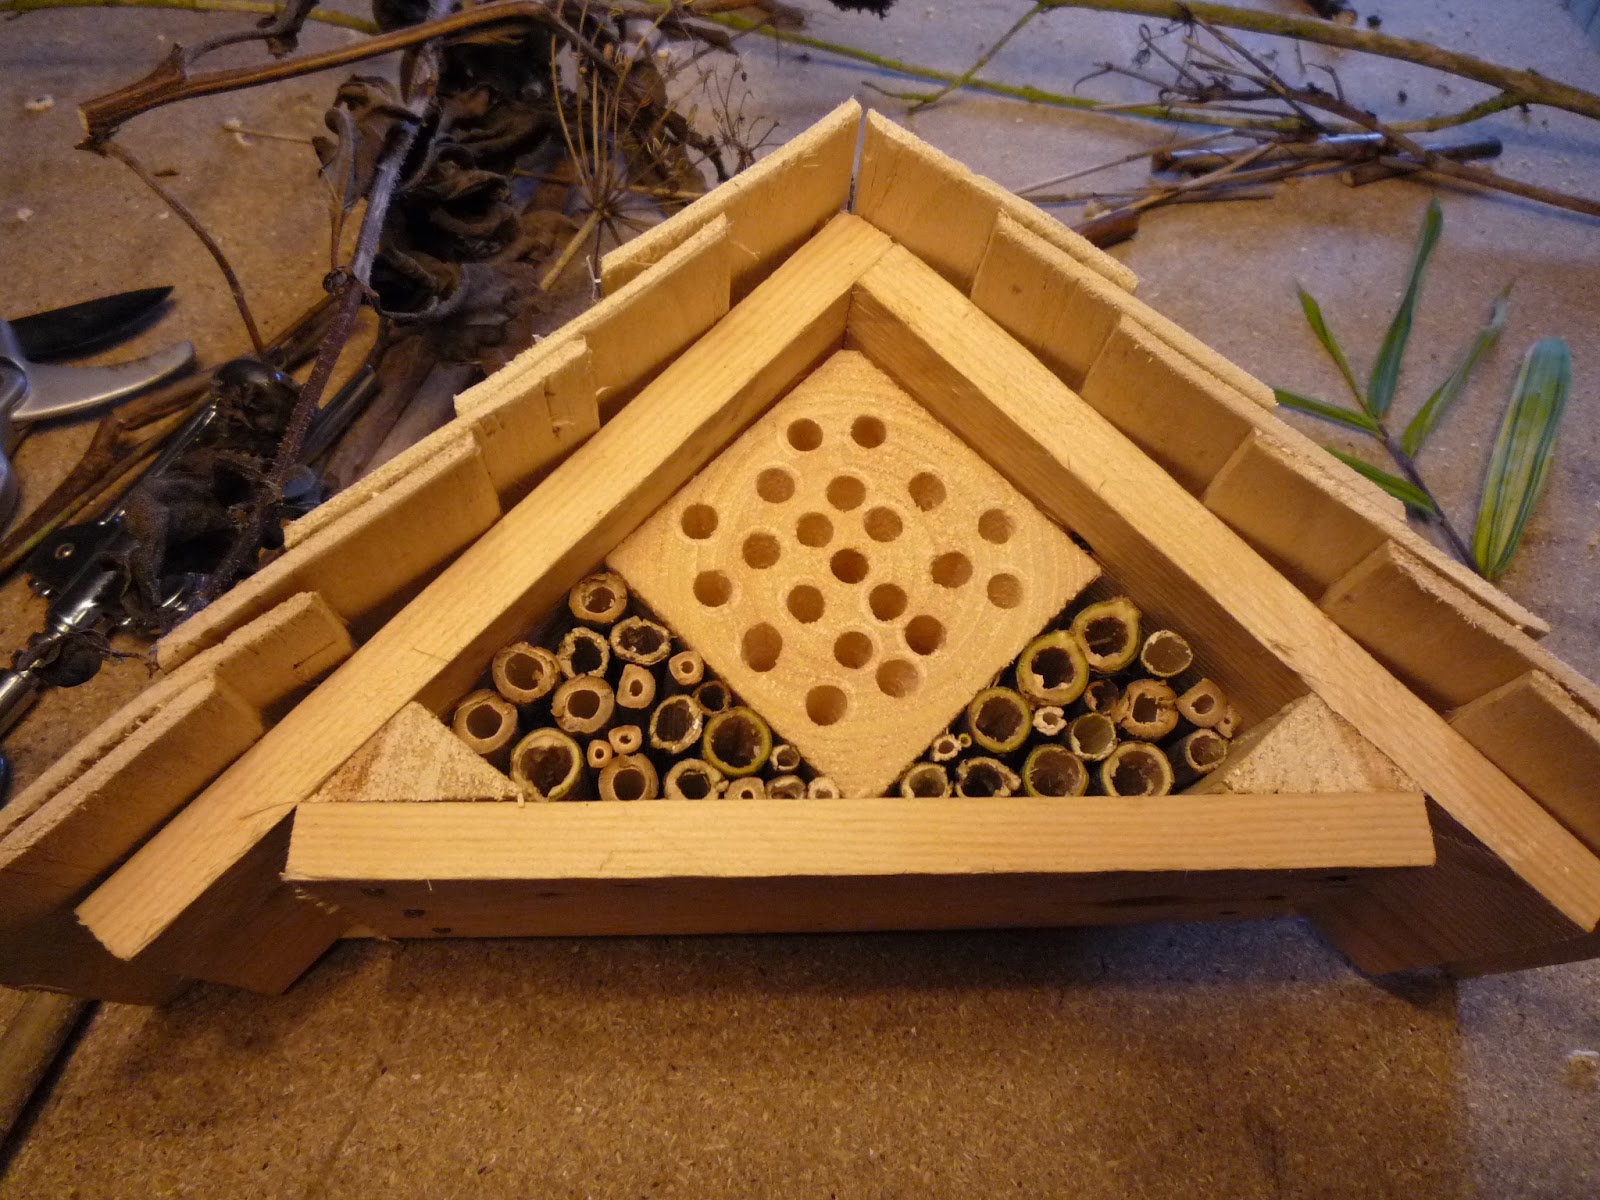 Insect house for mason bees